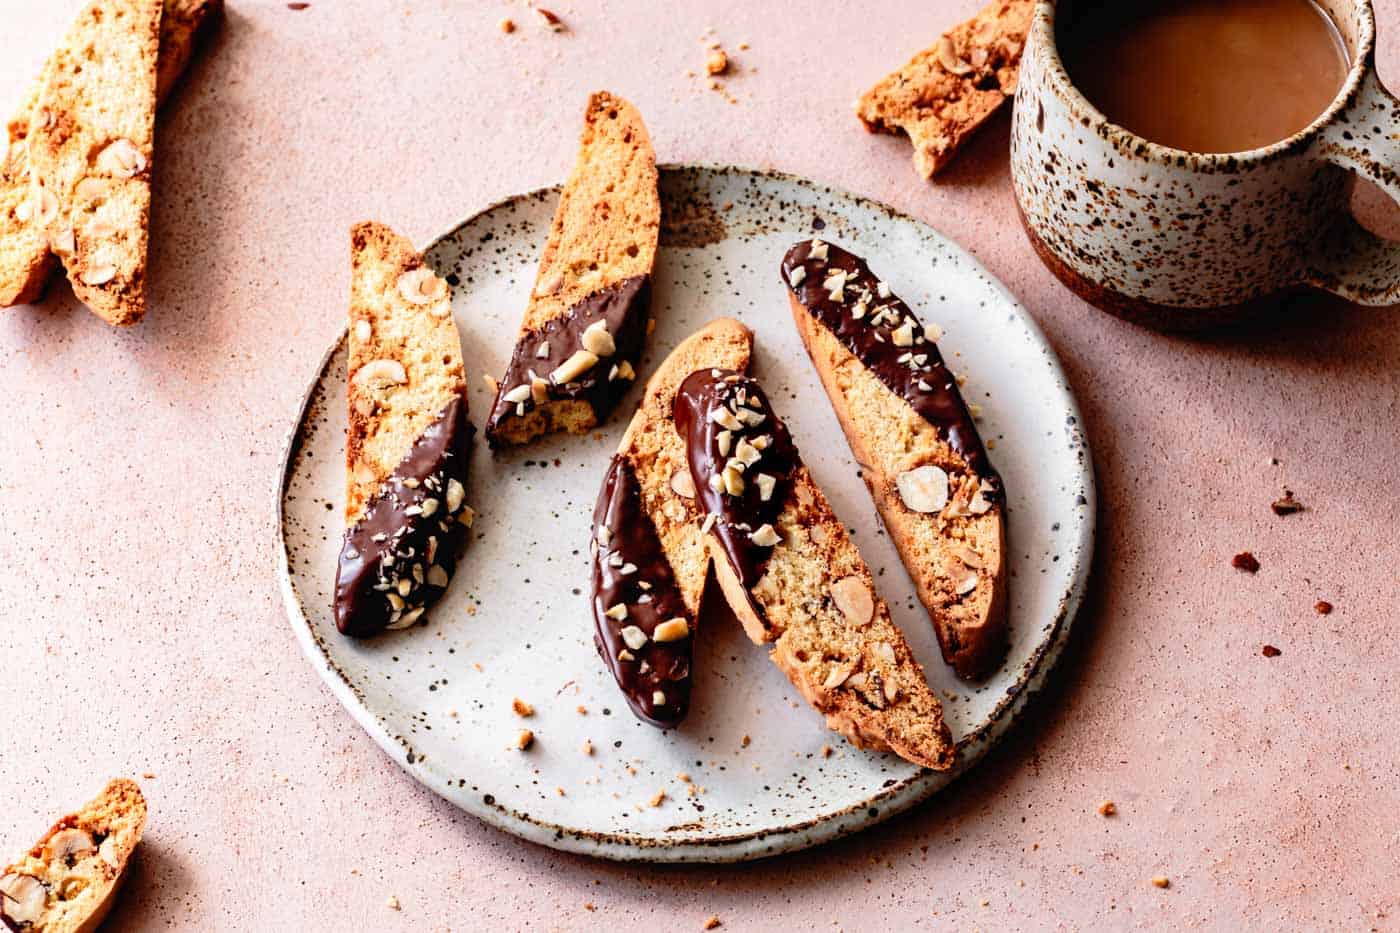 Gluten-Free Almond Biscotti recipe being served on a plate with coffee